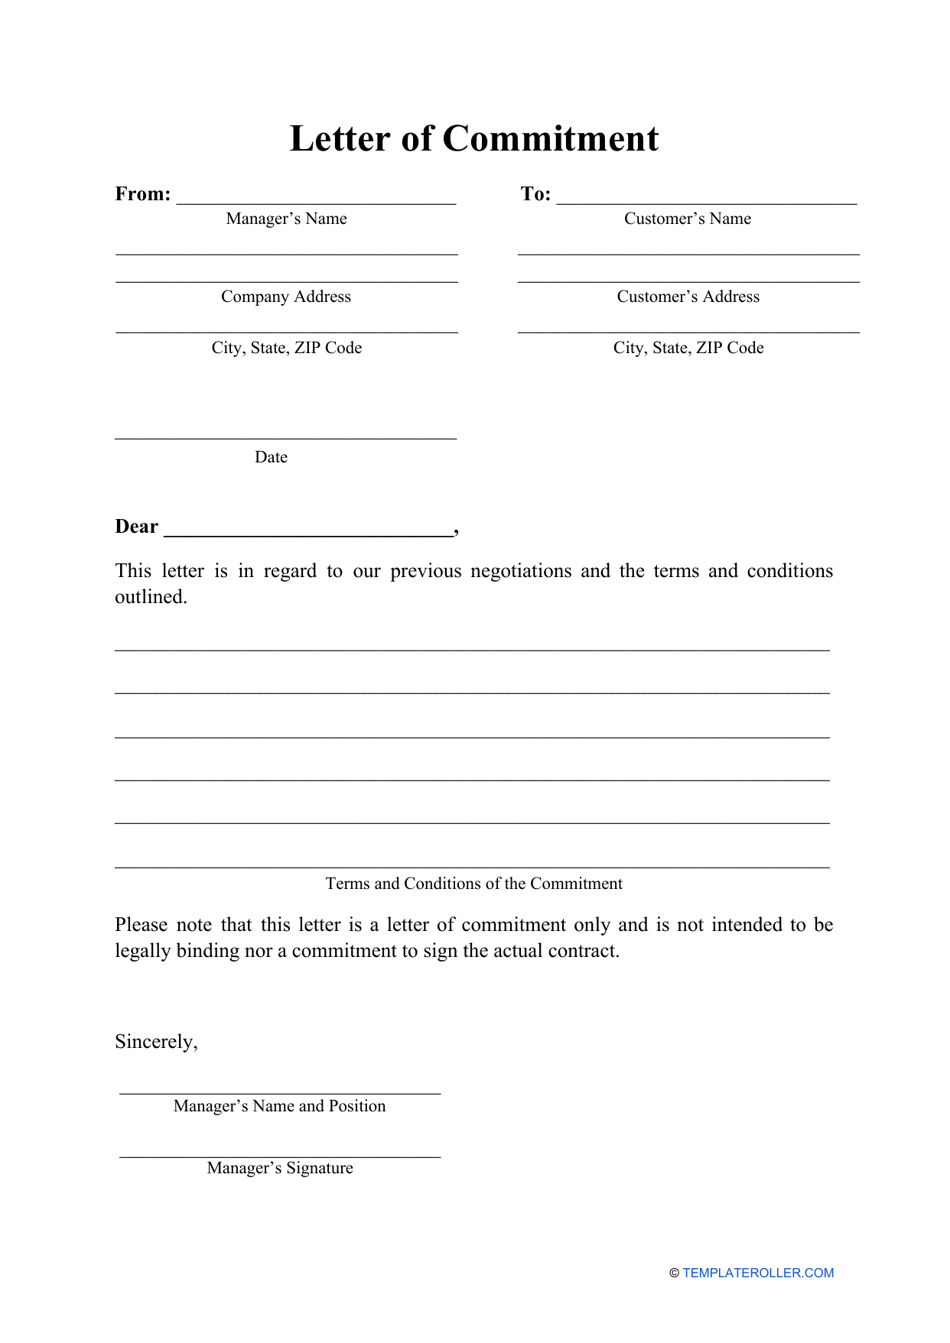 Letter of Commitment Download Printable PDF | Templateroller